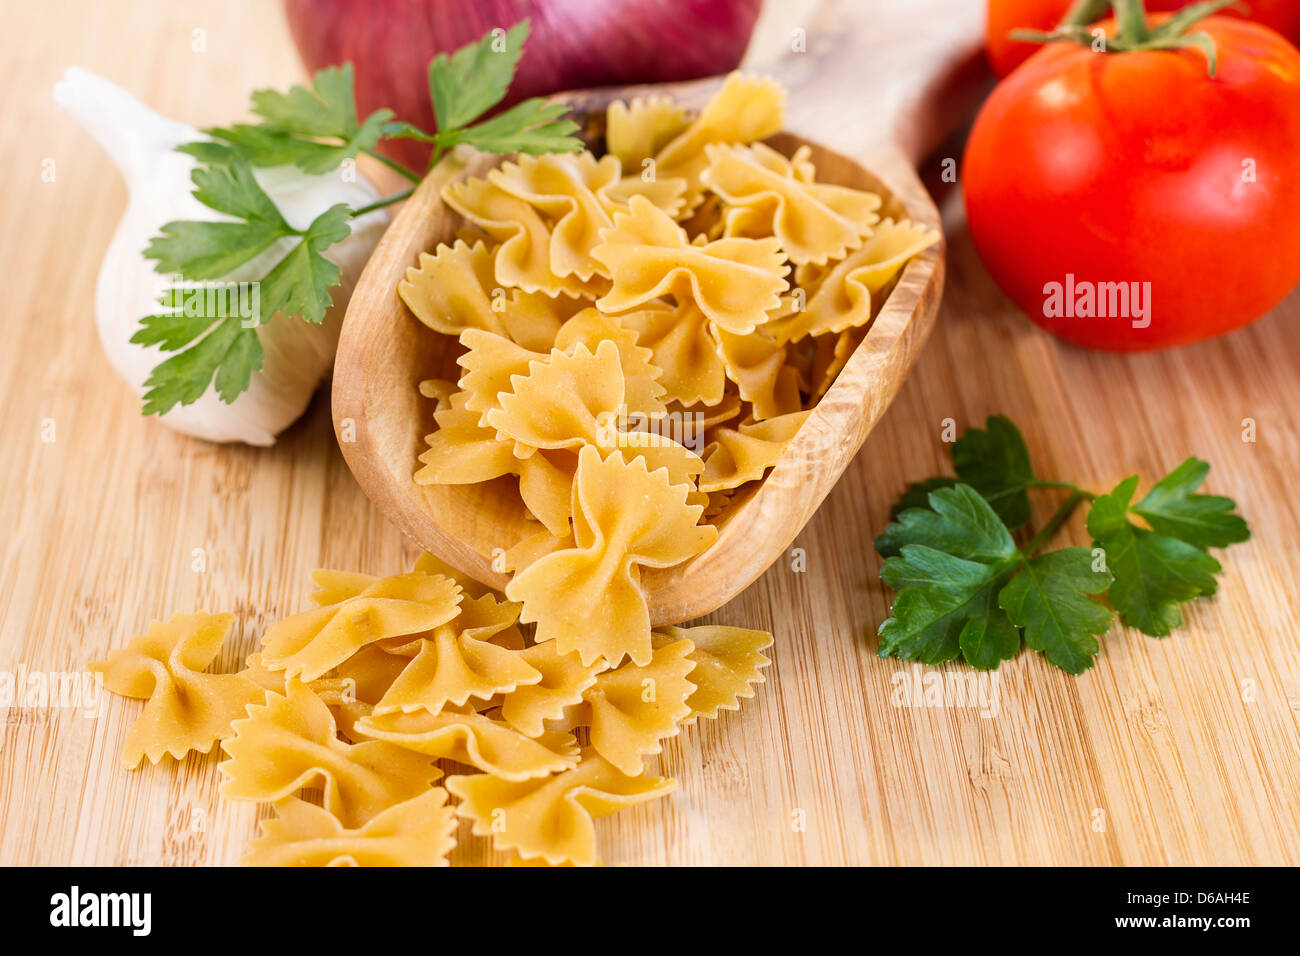 Closeup Horizontal photo of raw pasta in wooden spoon surround by onion, parsley, garlic and tomatoes on natural bamboo board Stock Photo